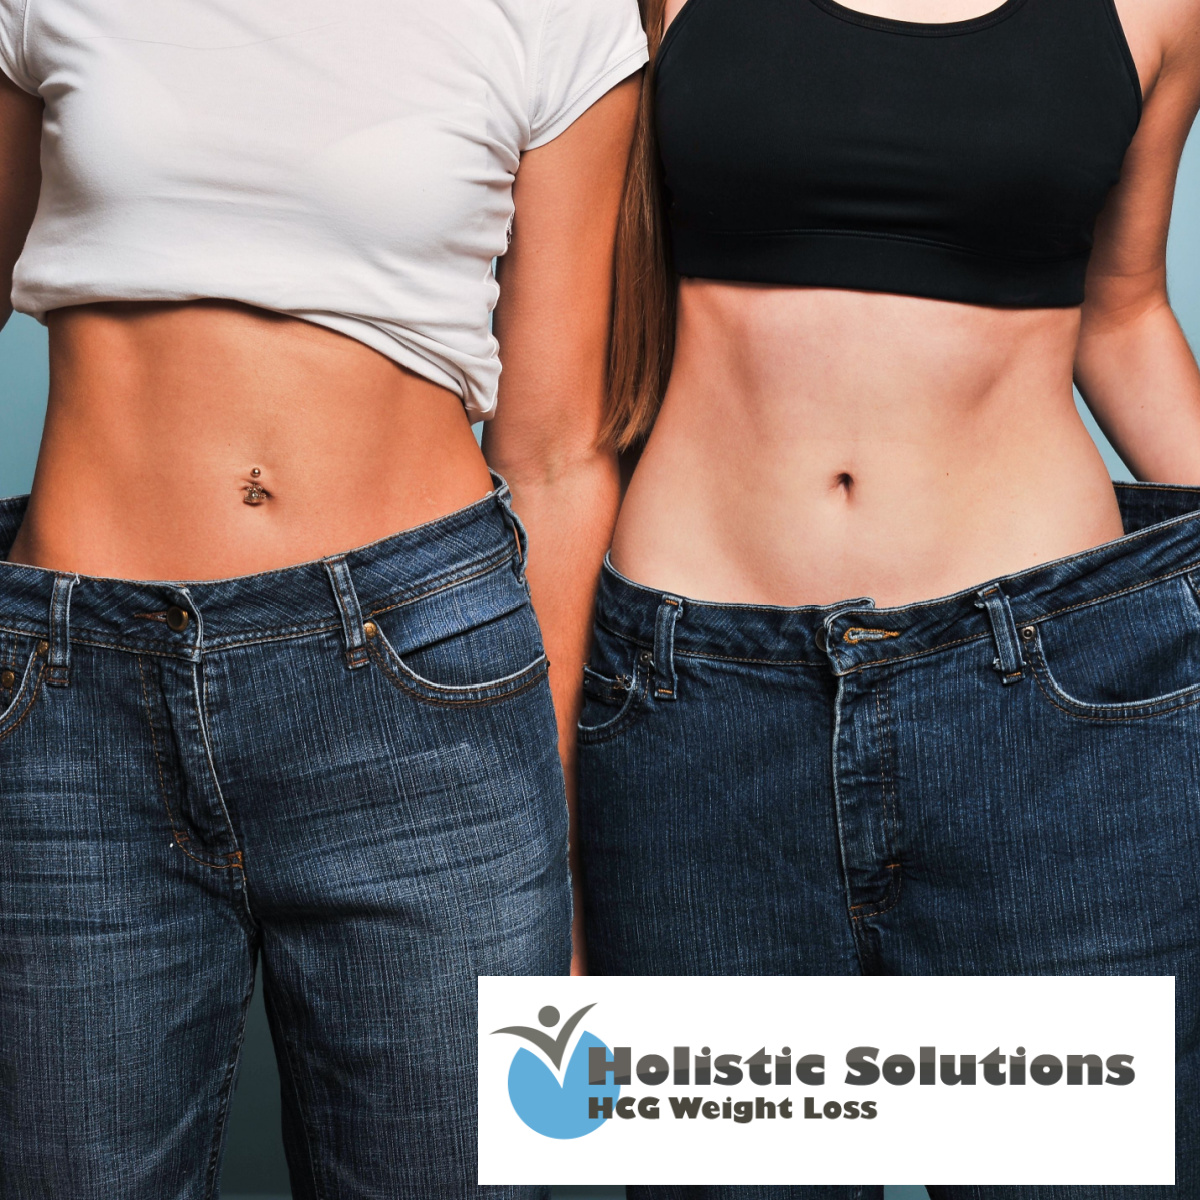 See What The Hype Is About With HCG Weight Loss Injections Near Santa Monica